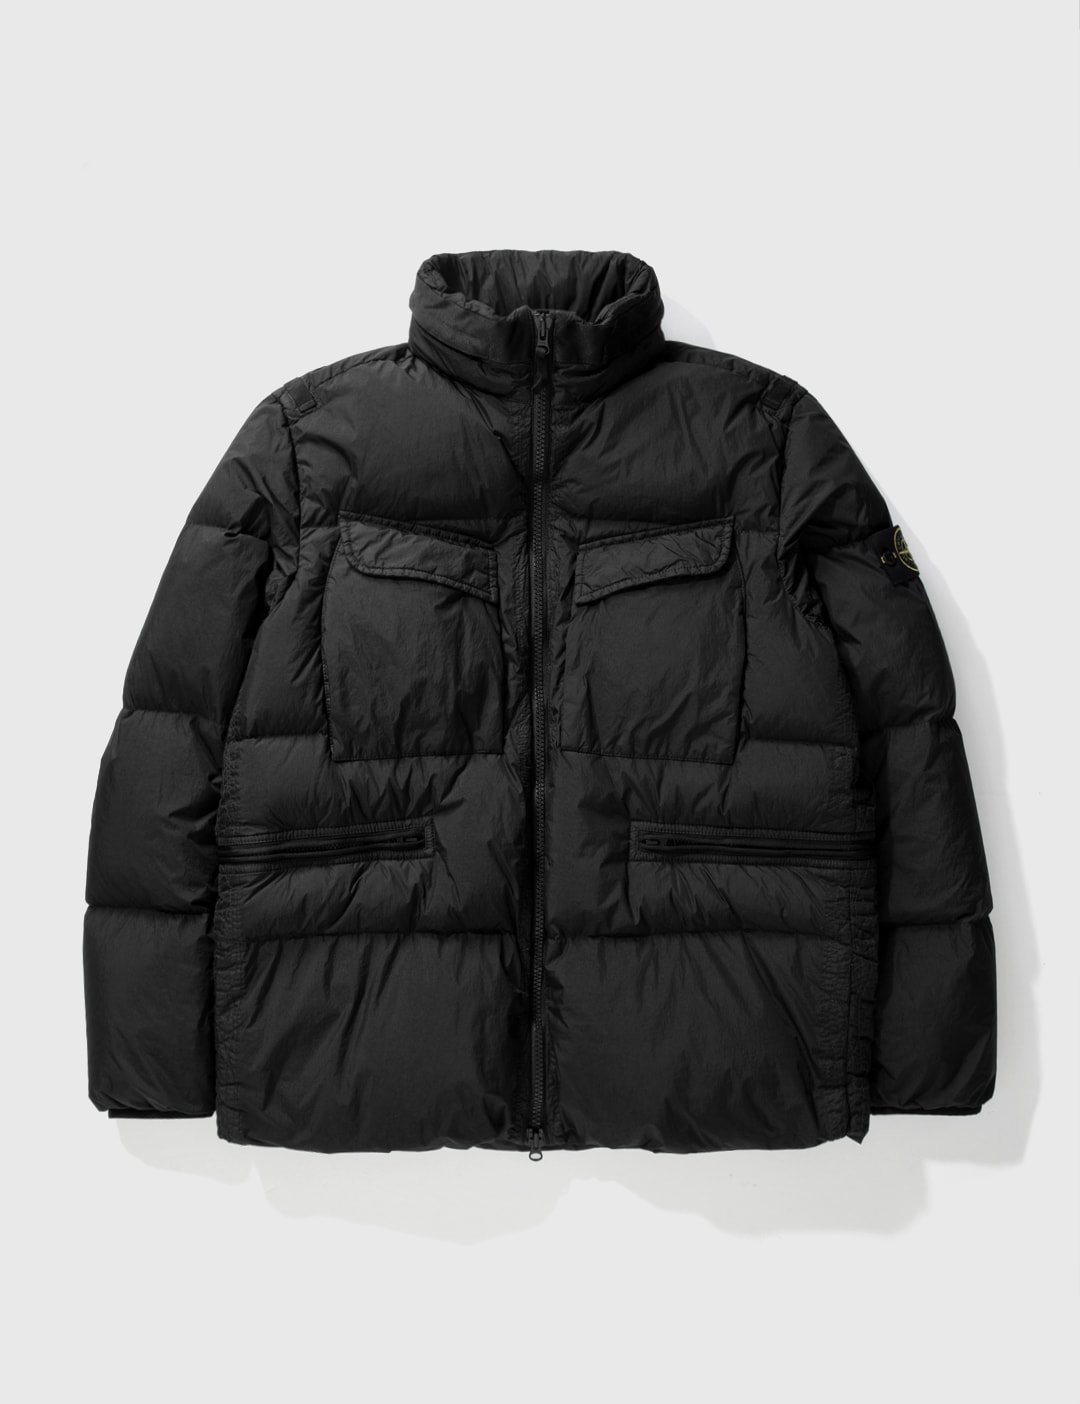 Dyed Crinkle Reps R-NY Down Jacket Placeholder Image